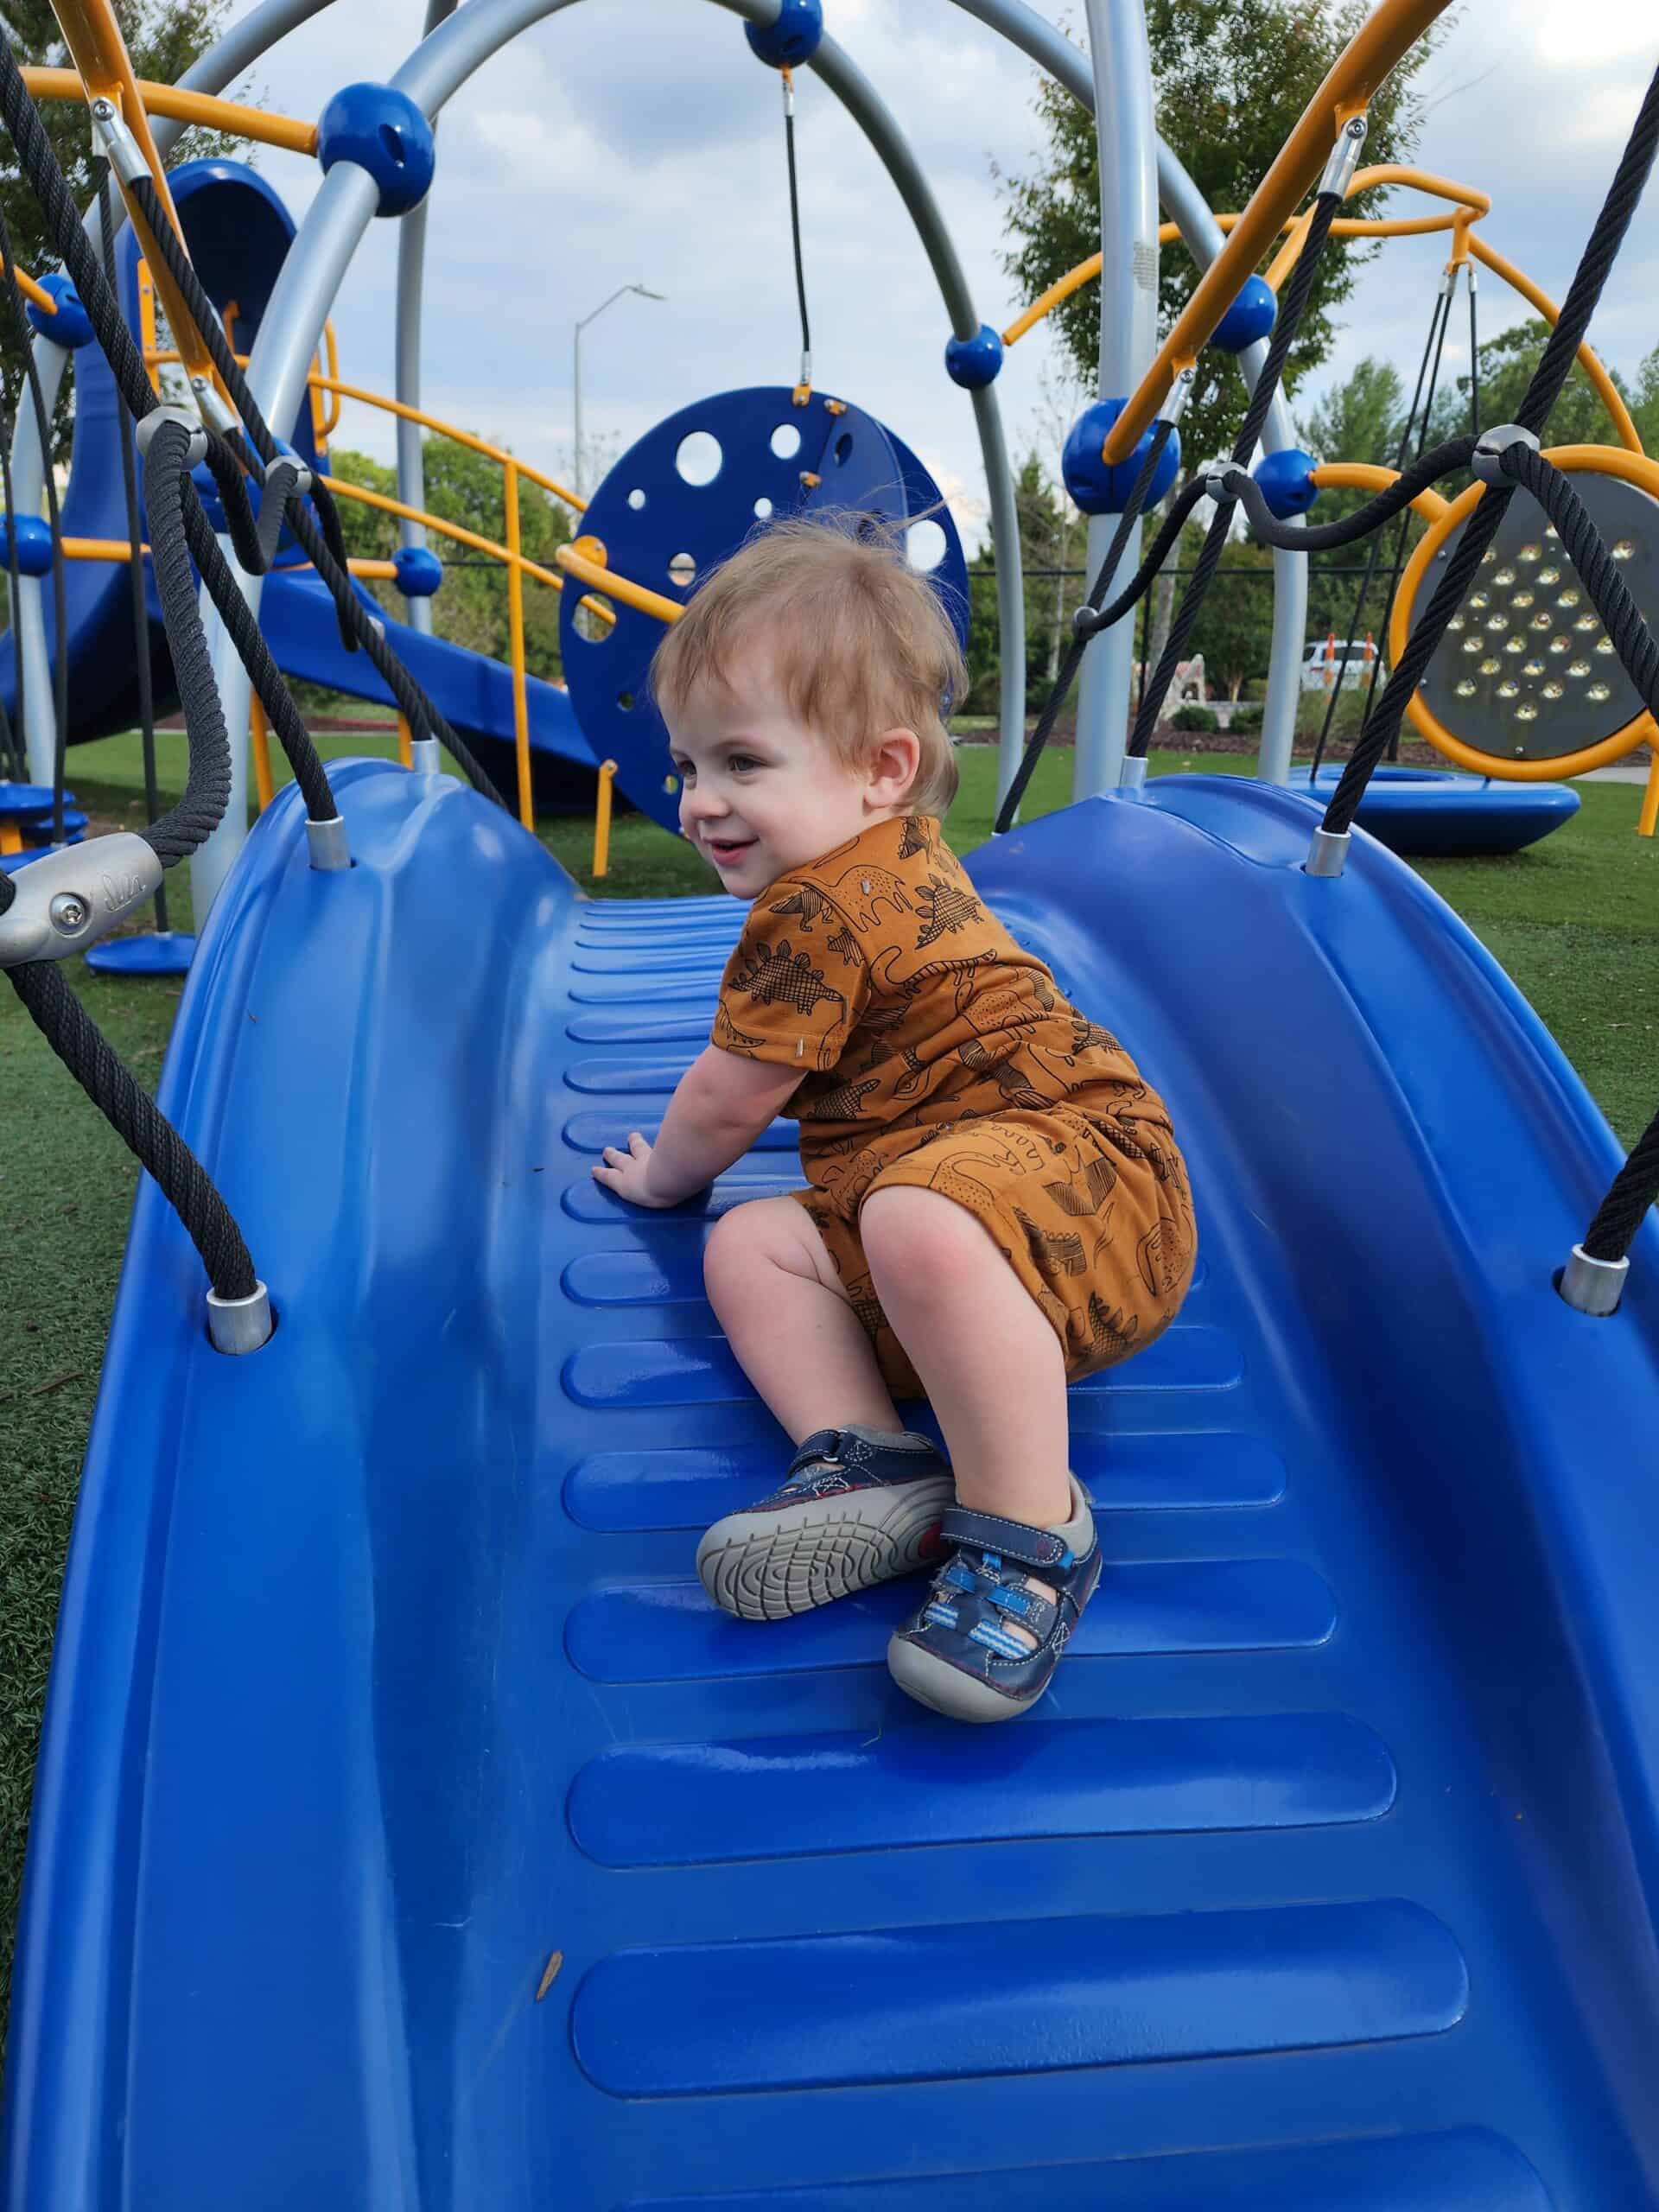 A toddler in a patterned brown outfit sits halfway down a ridged blue slide, looking back with a smile at Northwest Park's playground in Morrisville, North Carolina. The playground's climbing ropes and equipment provide a colorful and engaging background for active play